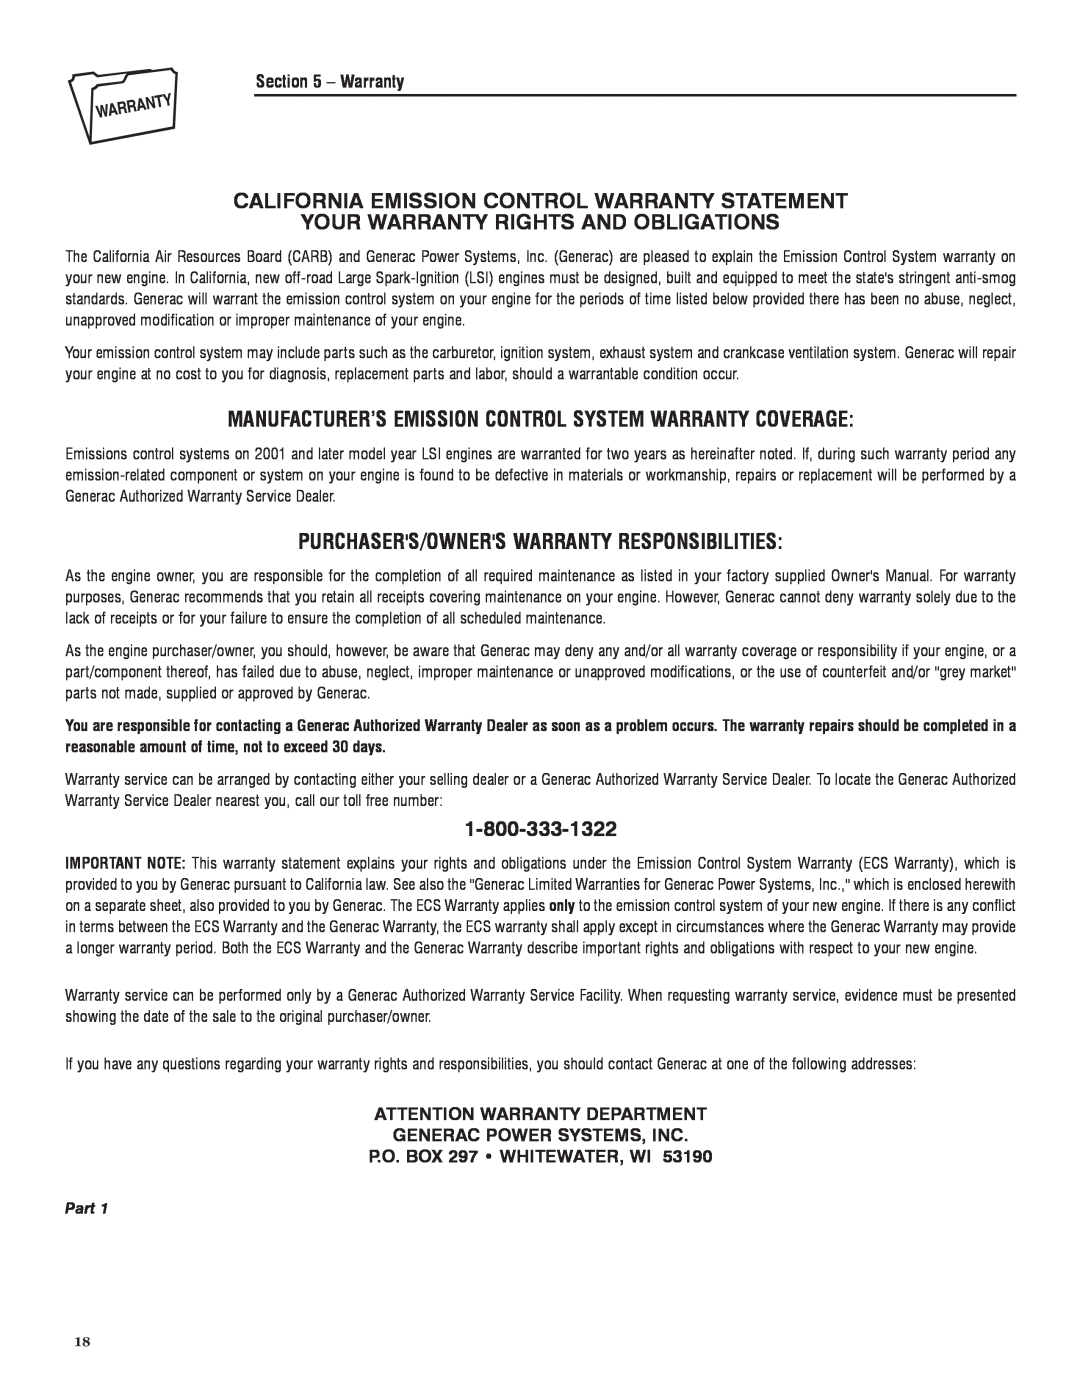 Sears 005735-0, 005734-0 manual California Emission Control Warranty Statement, Your Warranty Rights And Obligations, Part 